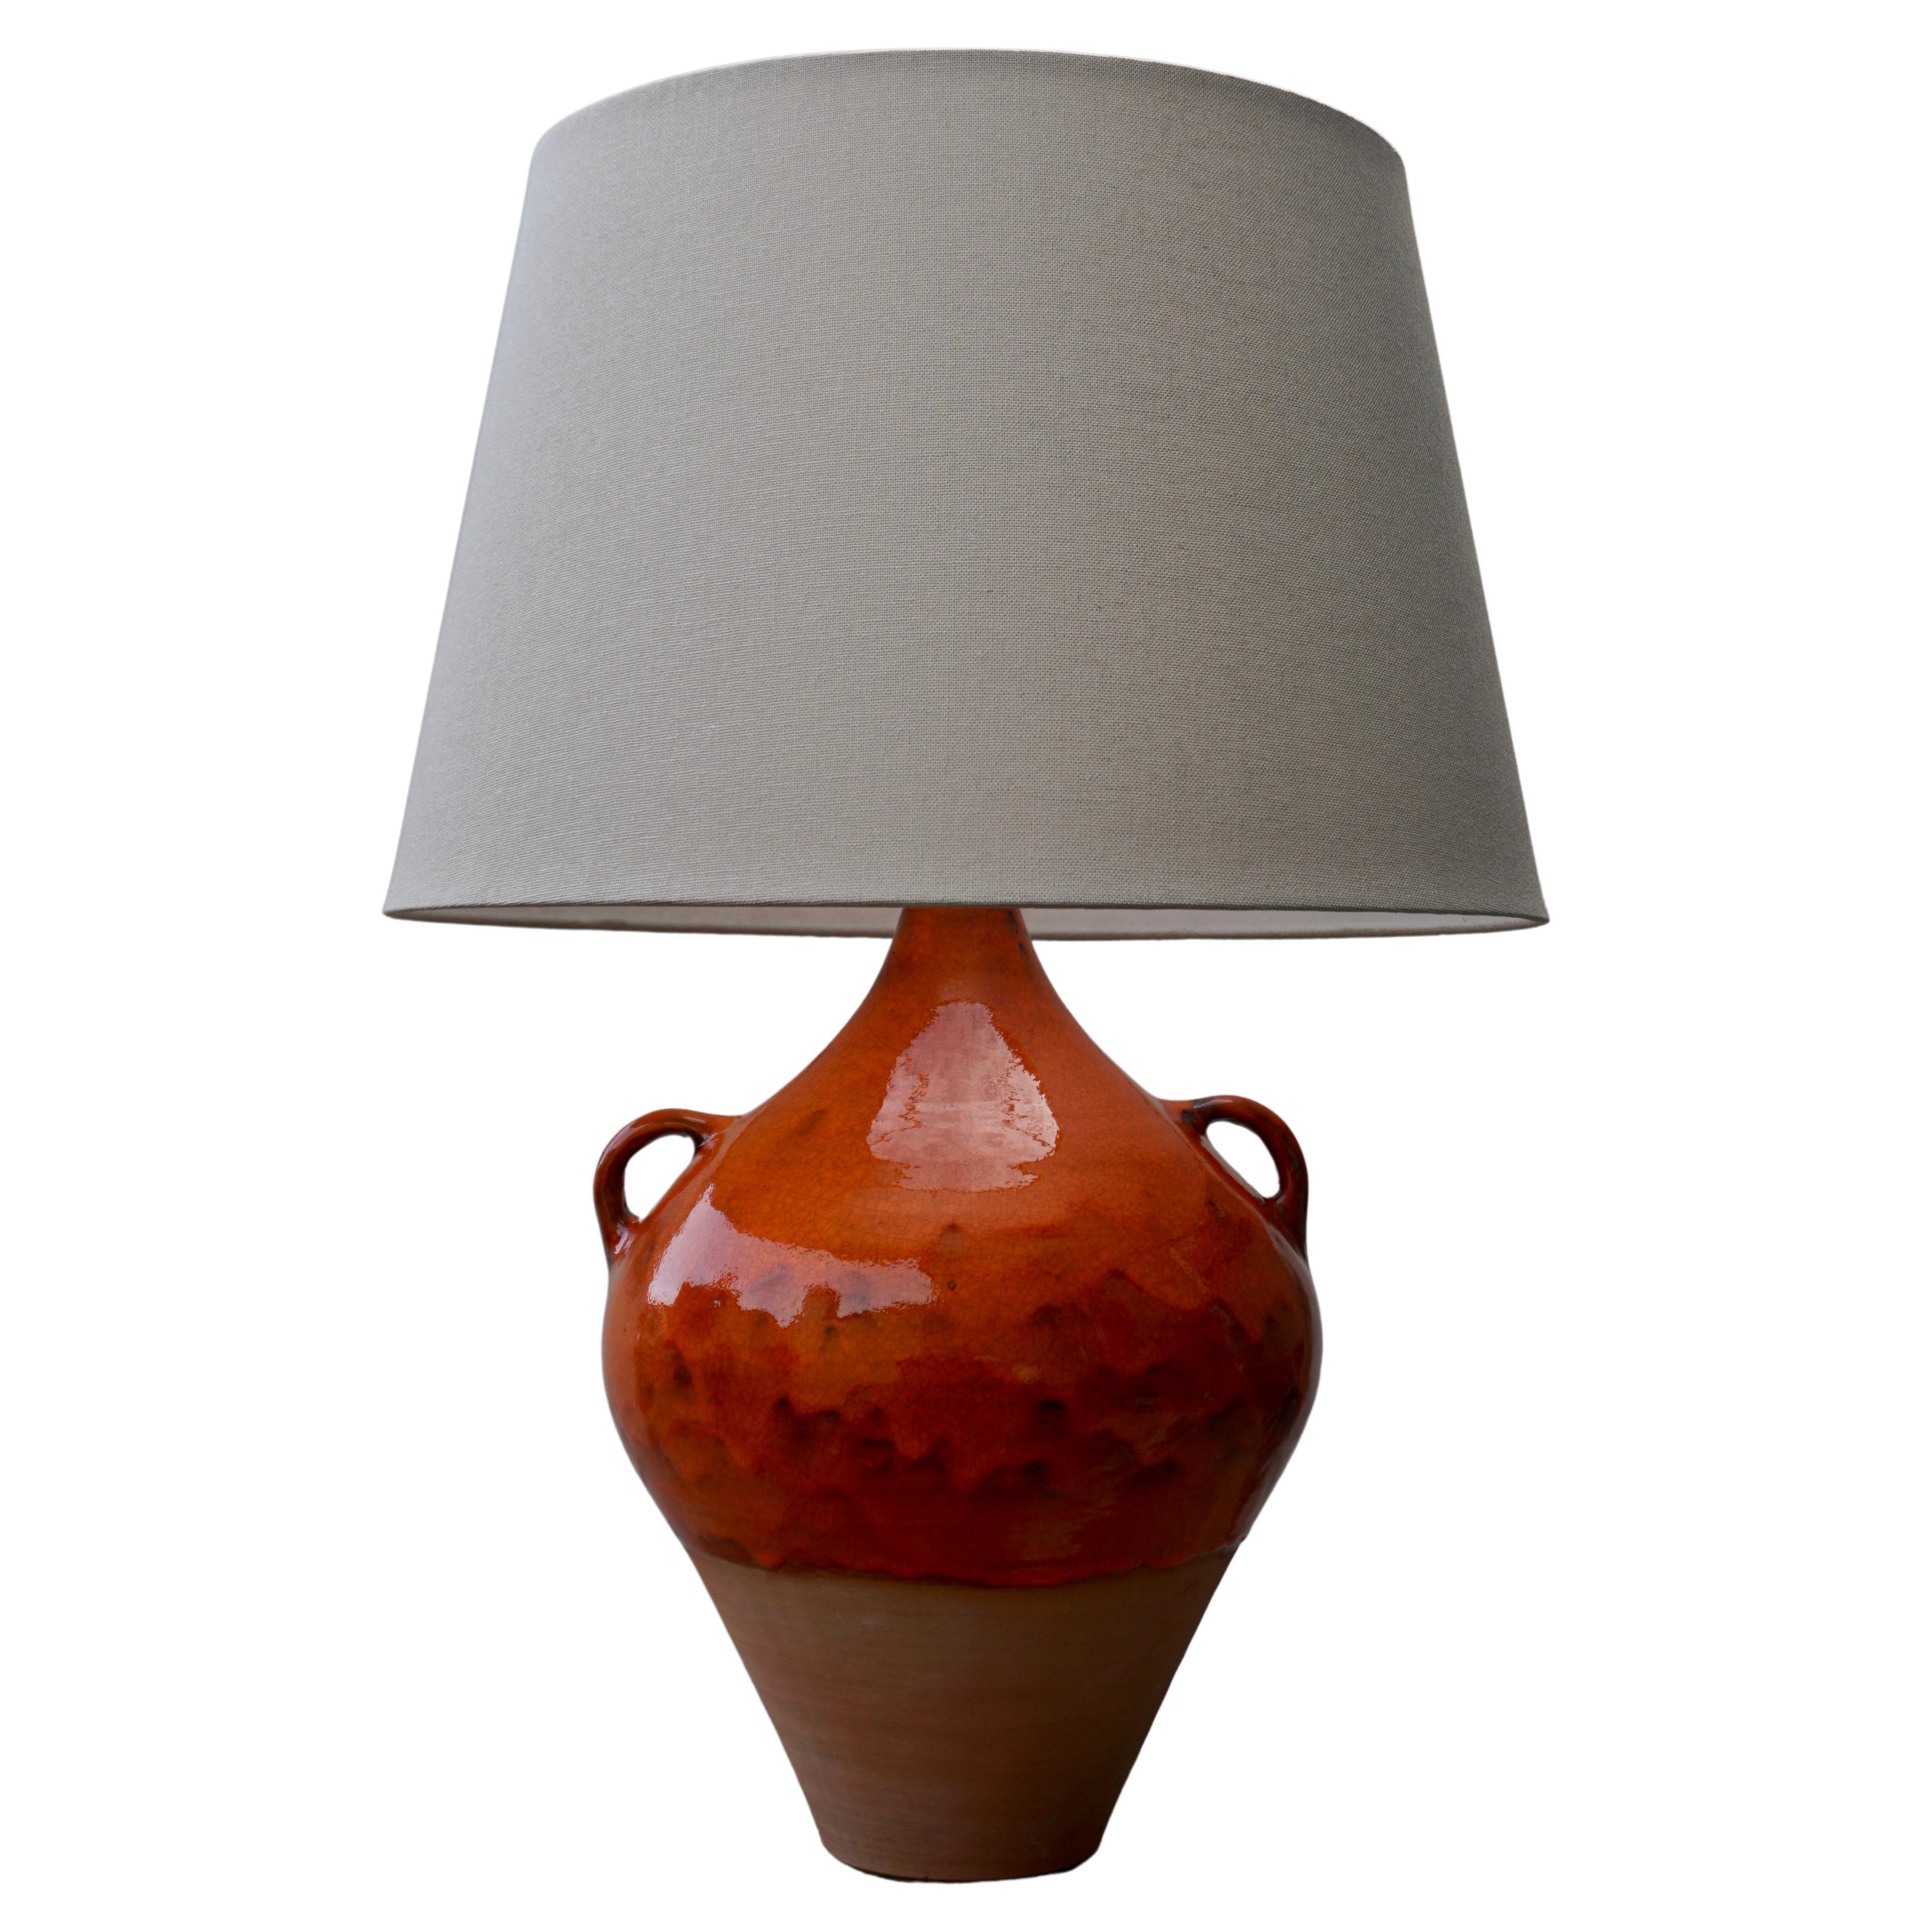 Contemporary Handmade Table Side Lamp Ceramic Terracotta Color For Sale